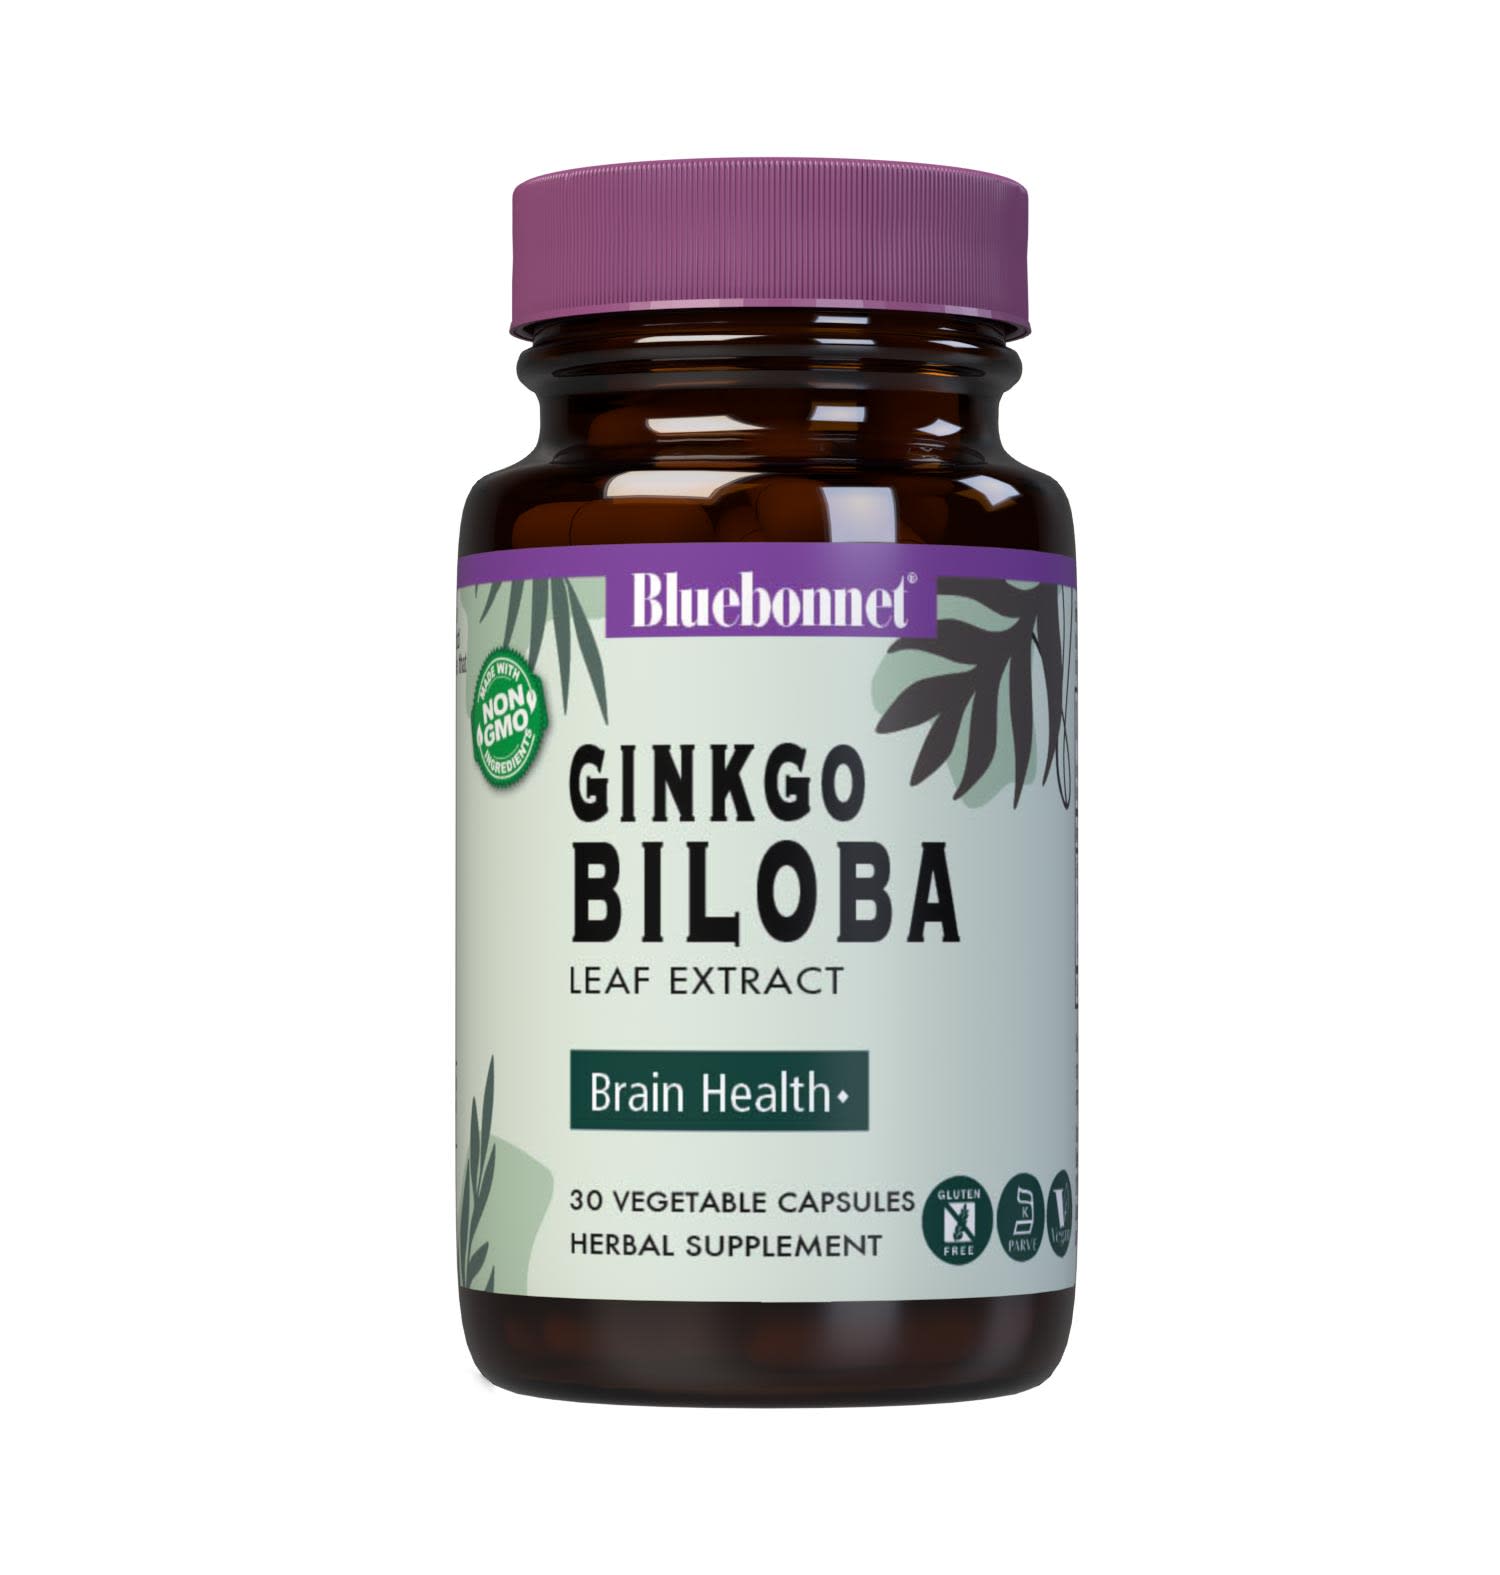 Bluebonnet’s Ginkgo Biloba Leaf Extract 30 Vegetable Capsules contain Ginkgoselect from Indena, a standardized extract of ginkgo flavoglycosides and terpene lactones, the most researched active constituents found in ginkgo biloba which may help support brain health and focus. A clean and gentle water-based extraction method is employed to capture and preserve ginkgo biloba’s most valuable components. #size_30 count